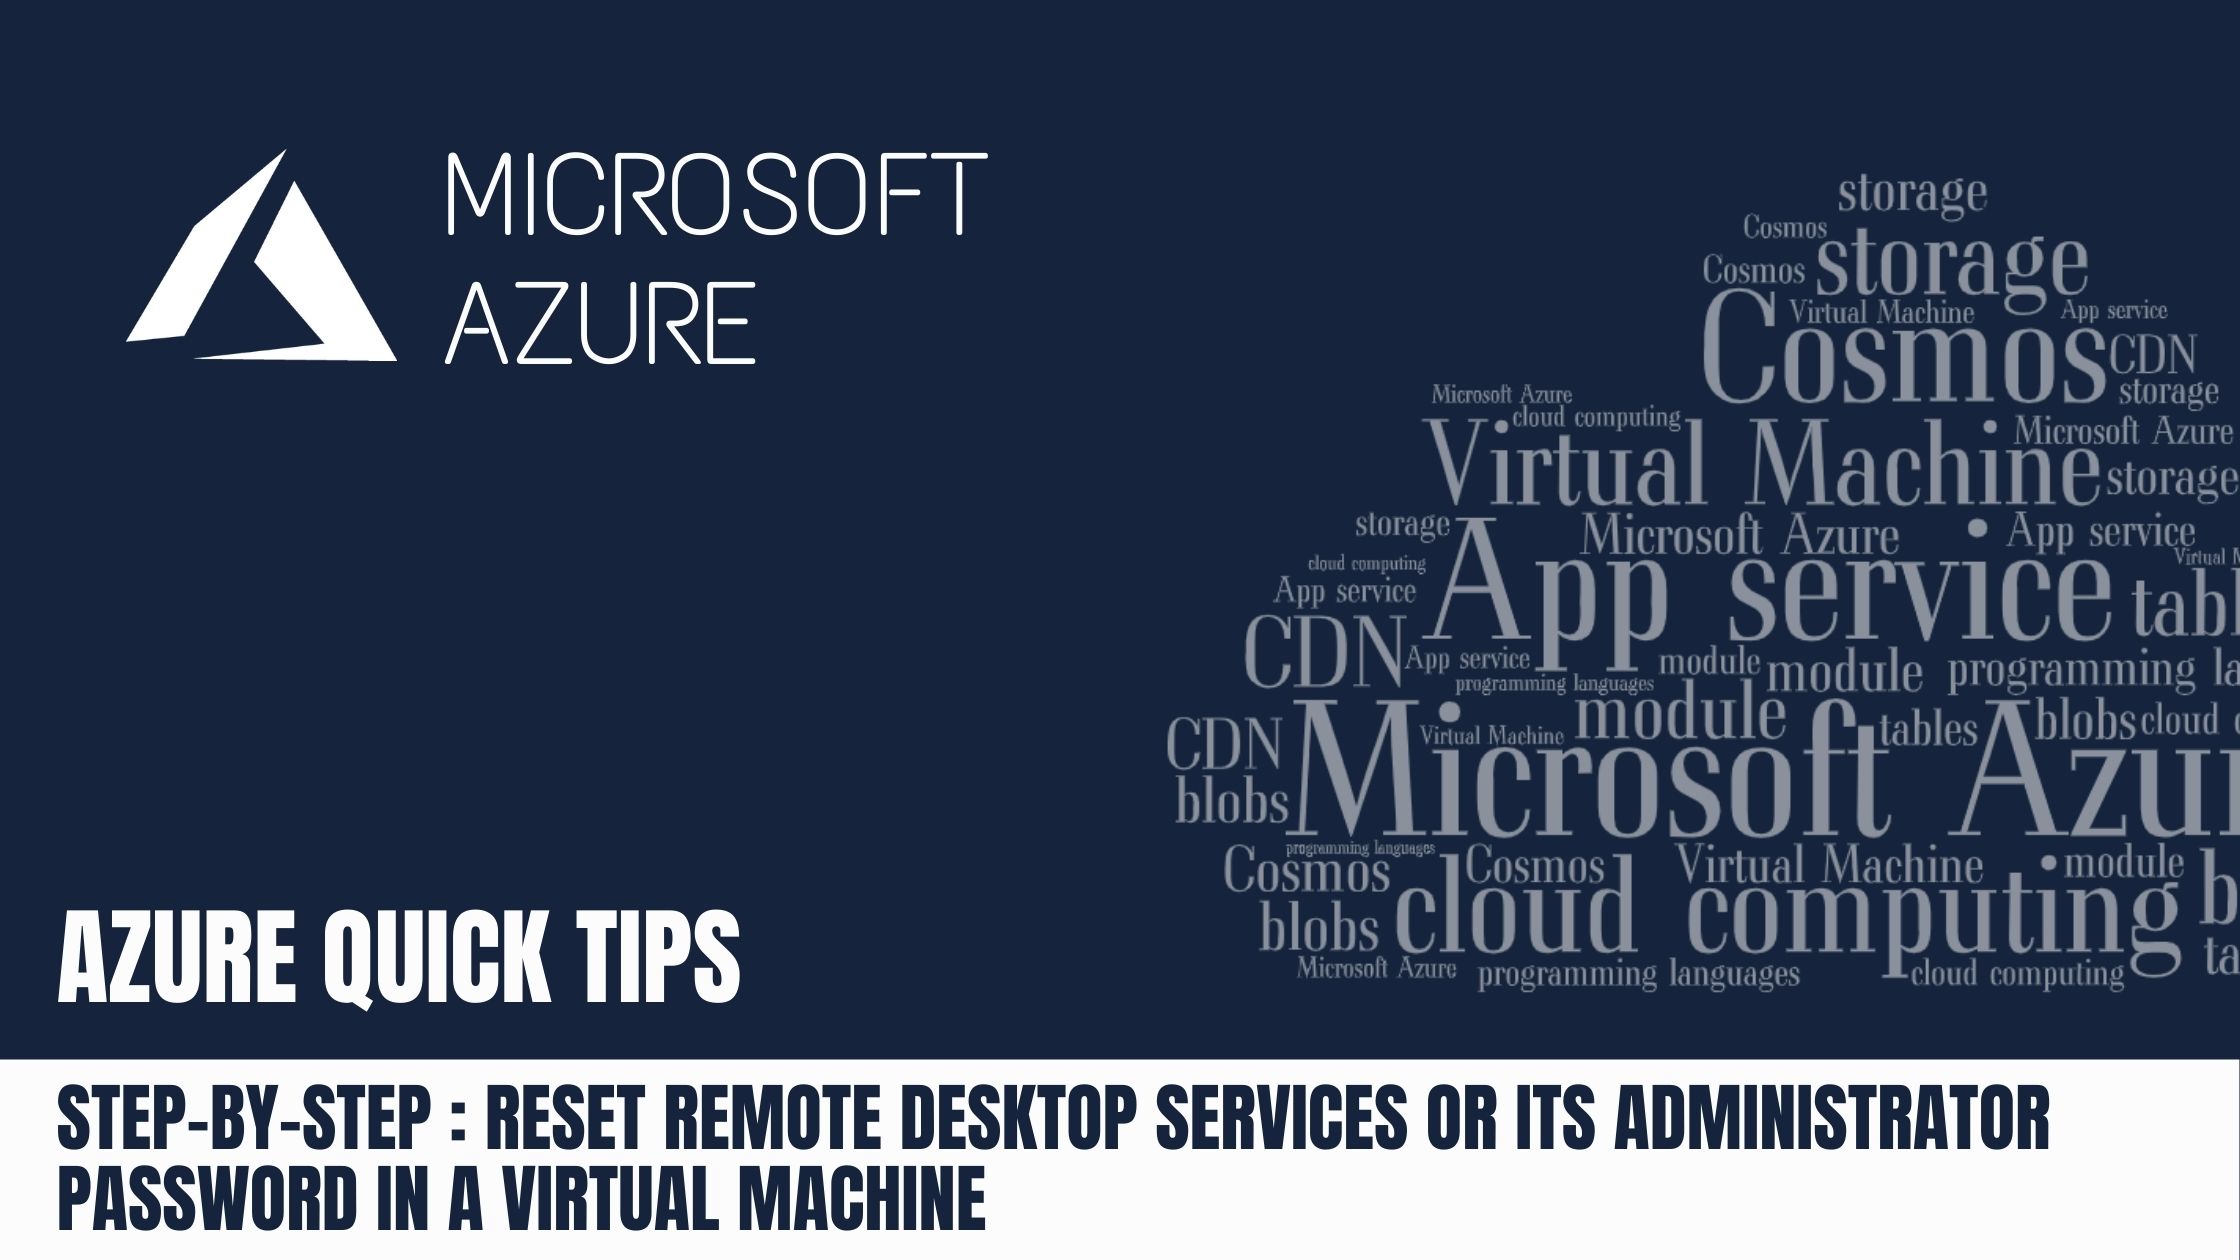 STEP BY STEP Reset Remote Desktop Services or its administrator password in a Virtual Machine